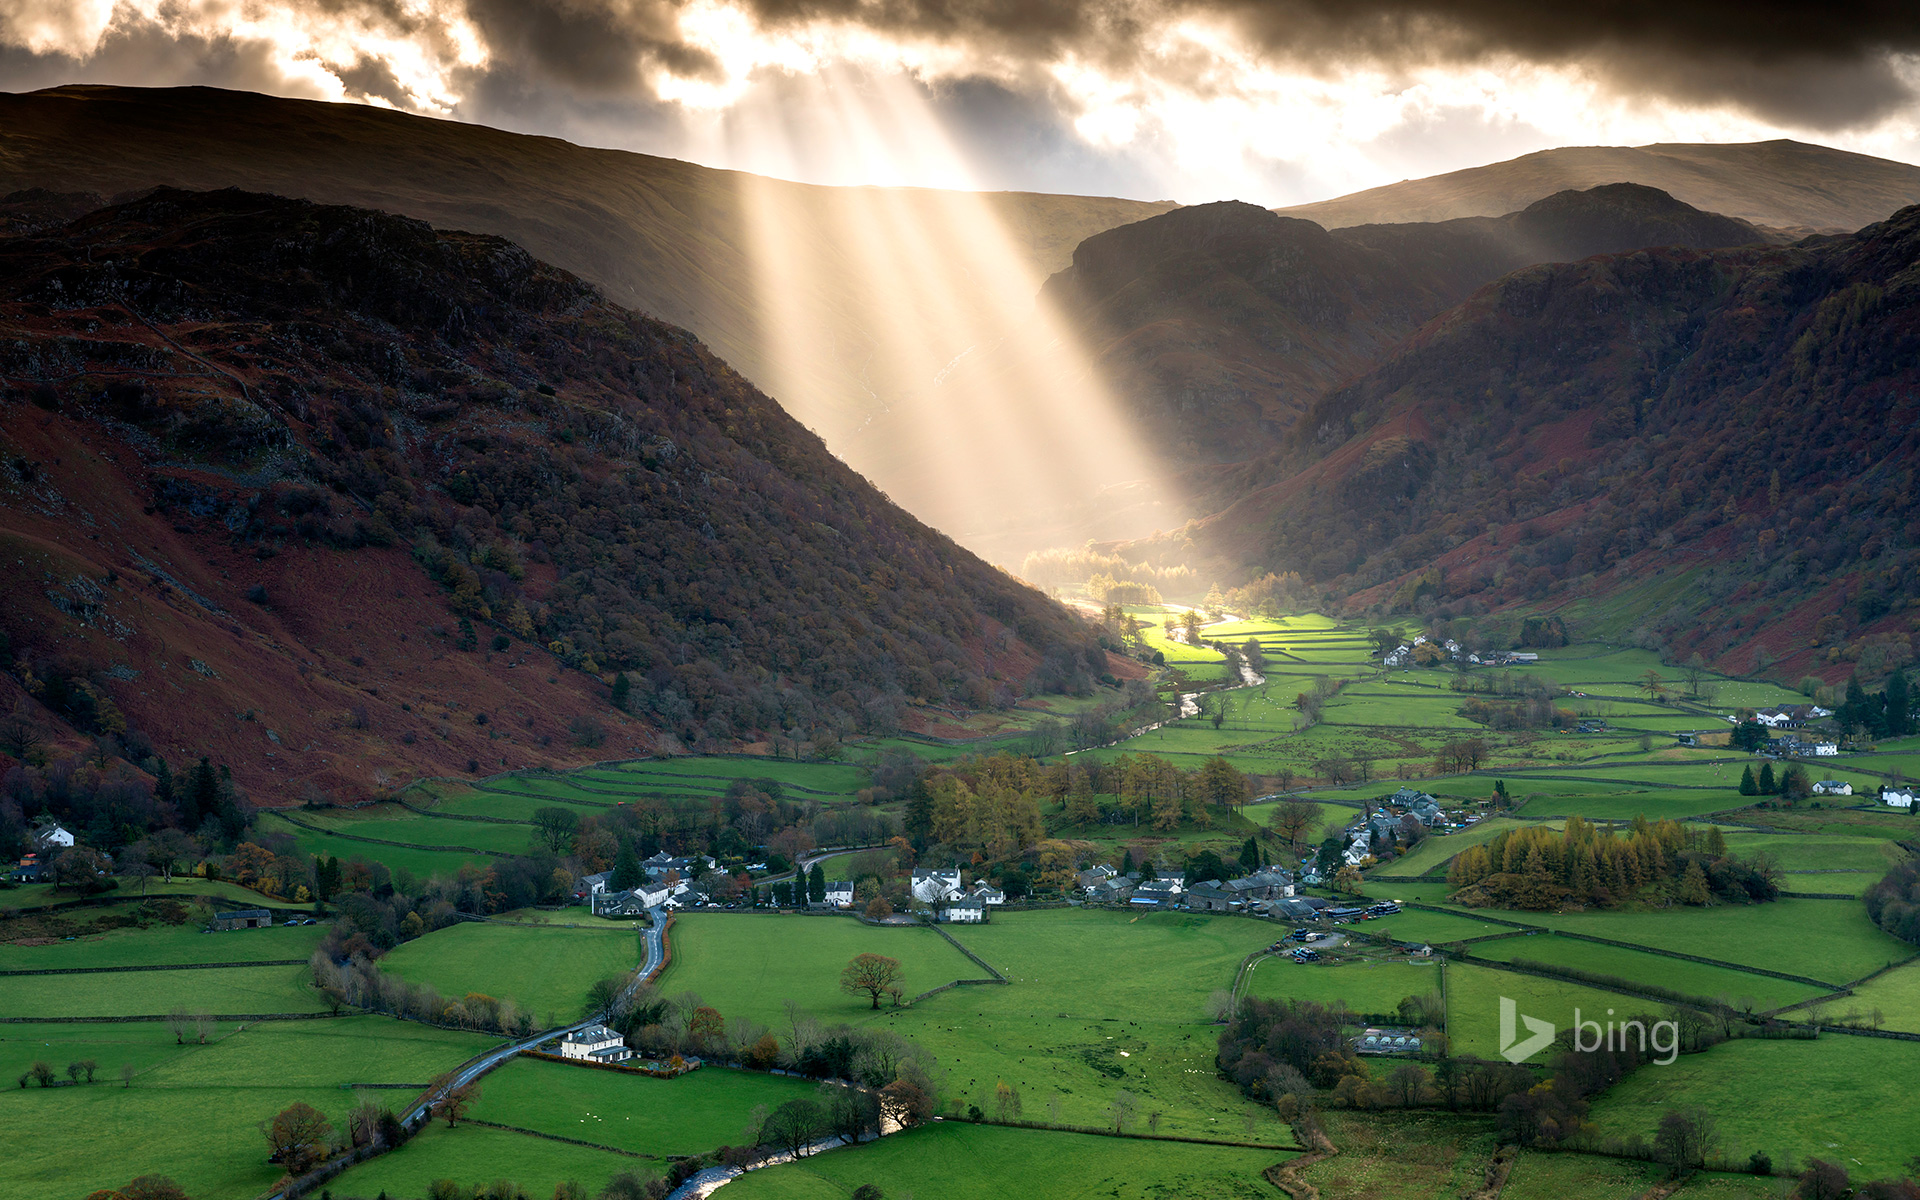 Shafts Of Light Work Their Way Across The Borrowdale Valley In